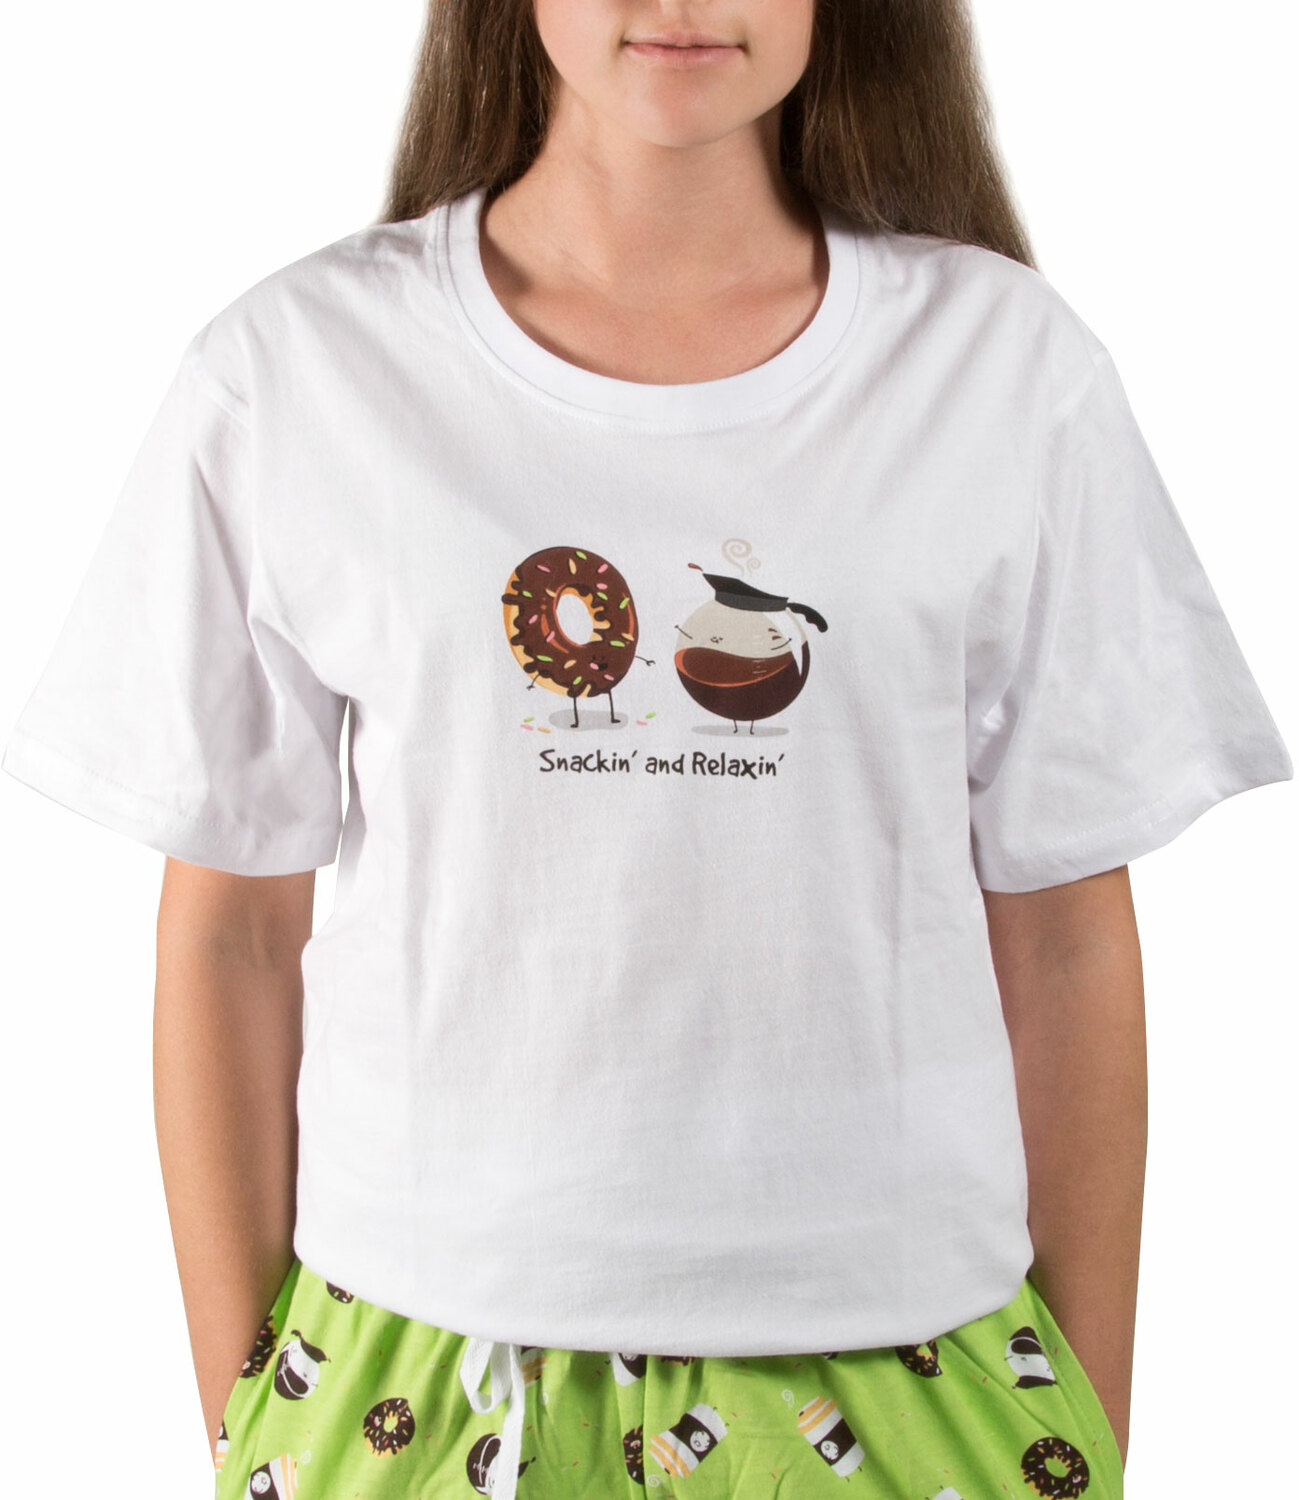 Donuts and Coffee by Late Night Snacks - Donuts and Coffee - XL Unisex T-Shirt